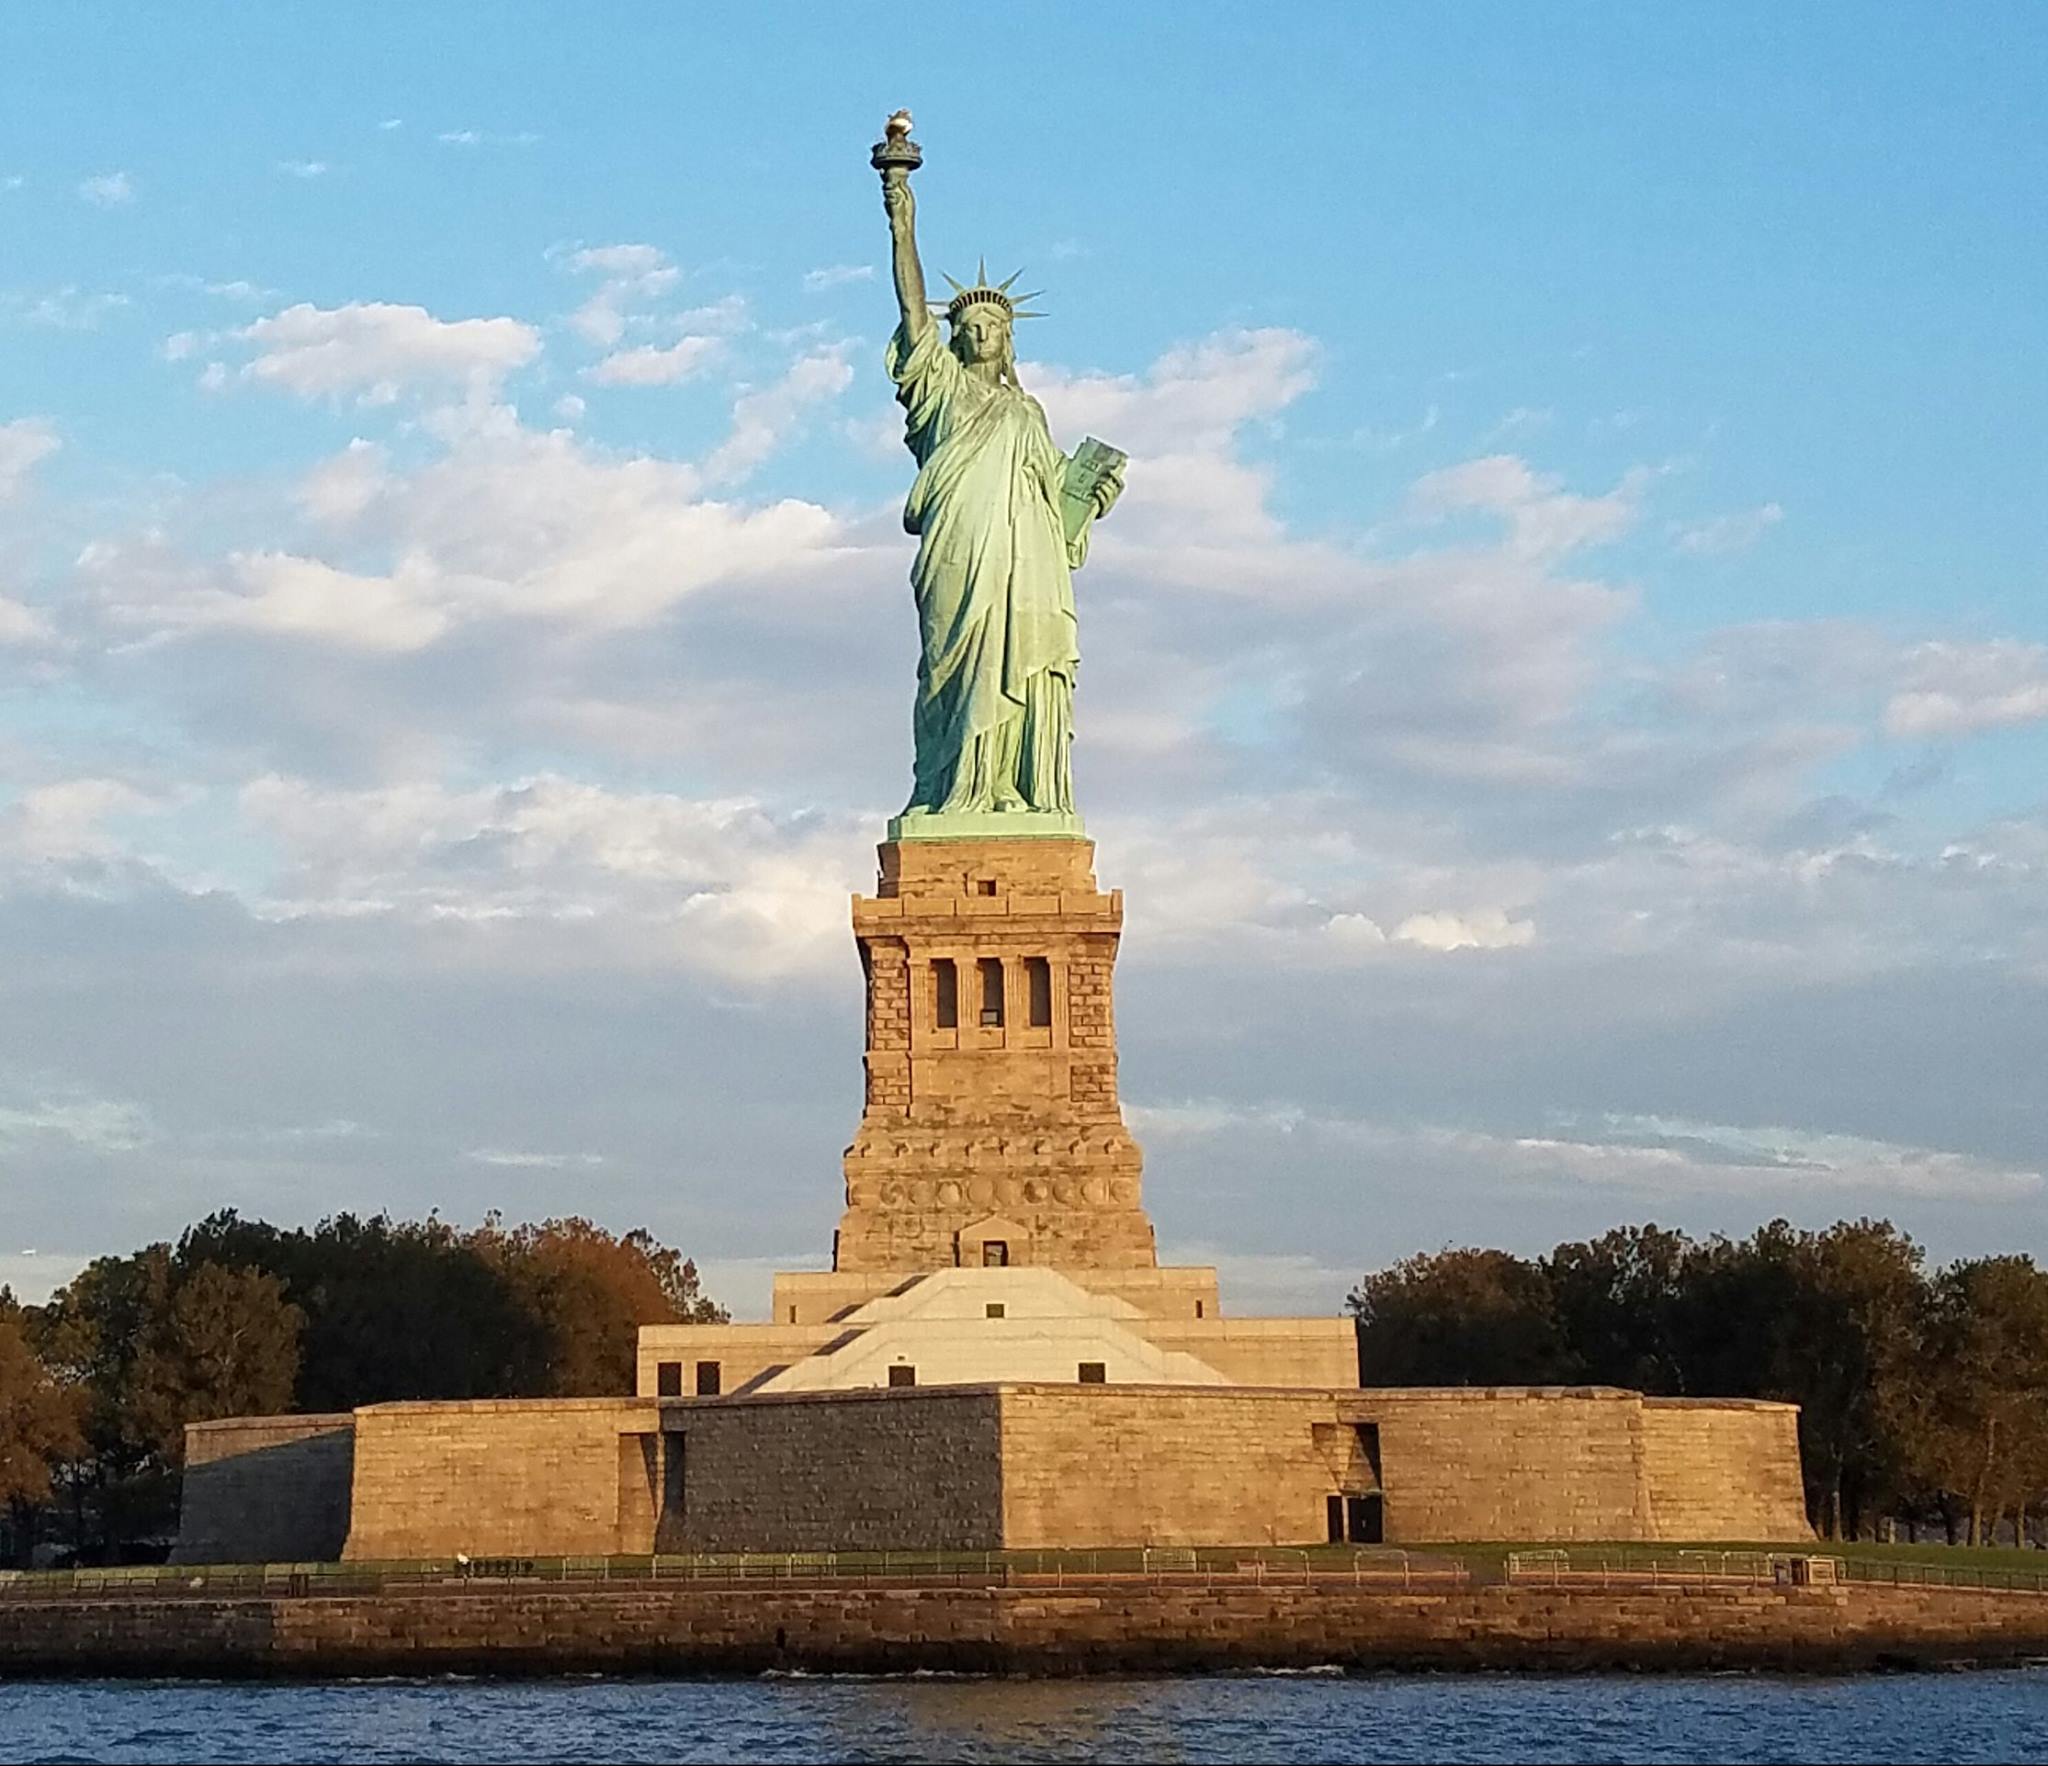 10 Statue of Liberty facts to celebrate her 130th birthday